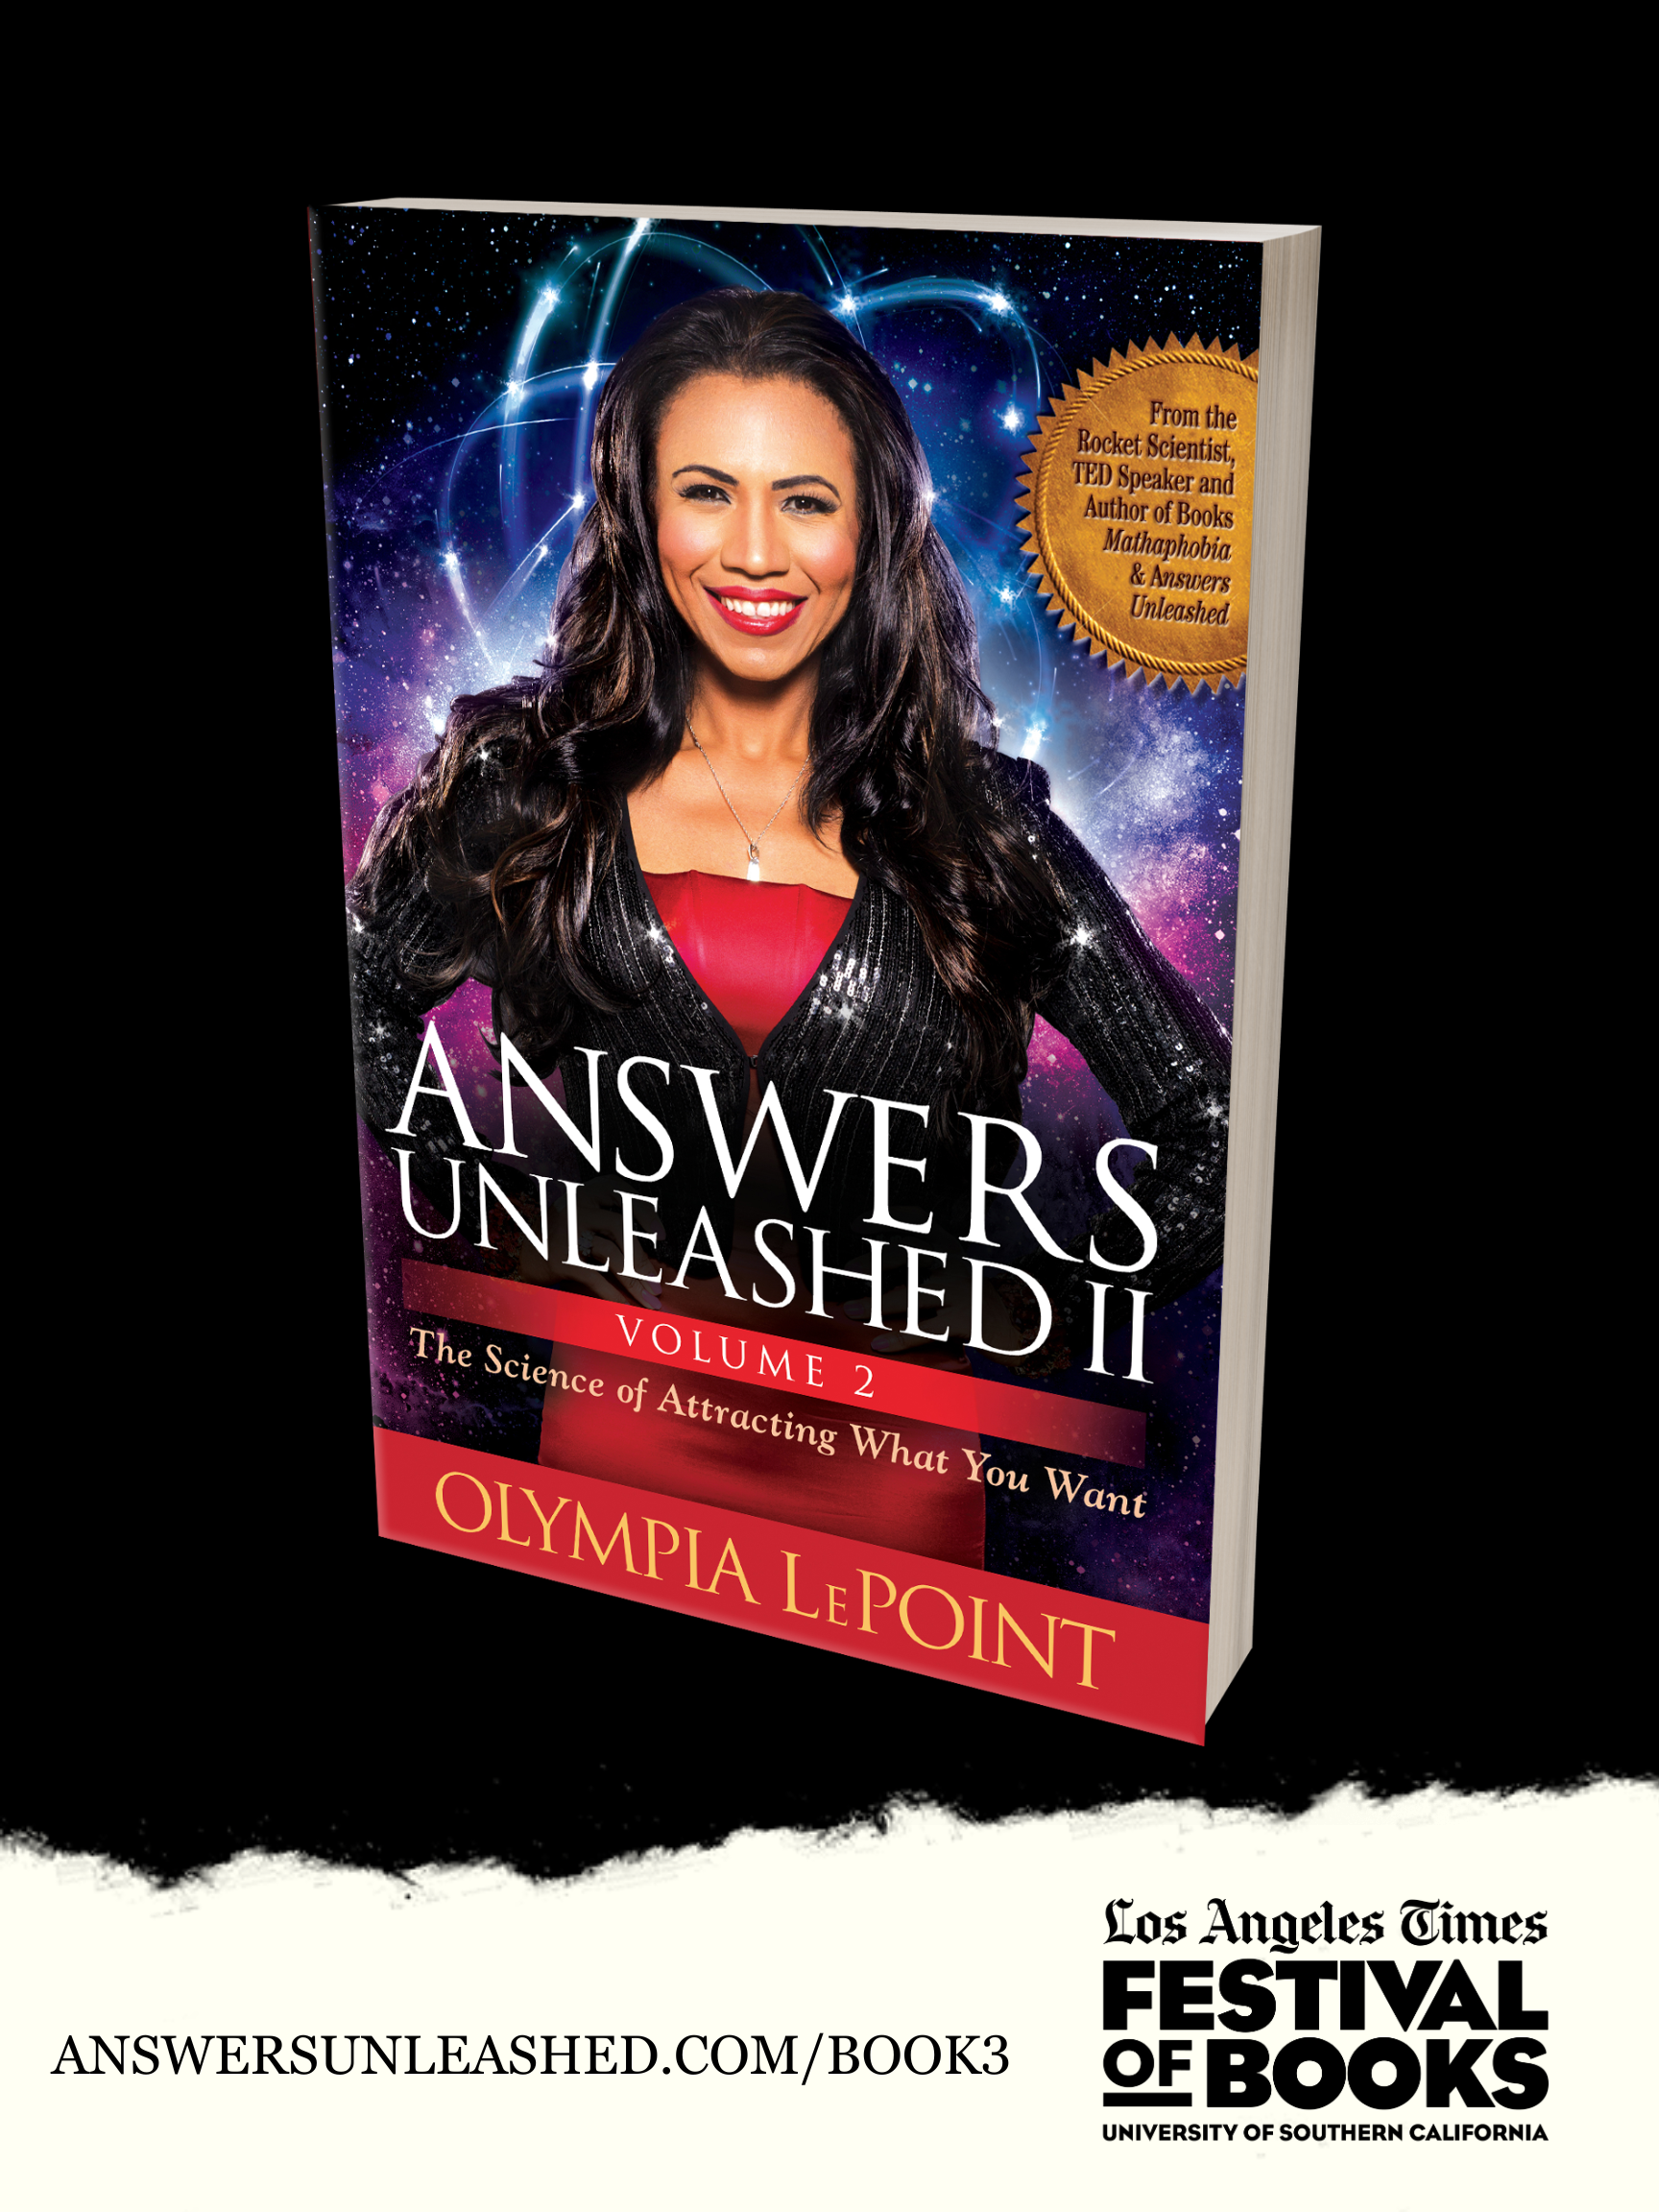 Olympia LePoint's third book, Answers Unleashed II: The Science of Attracting What You Want.